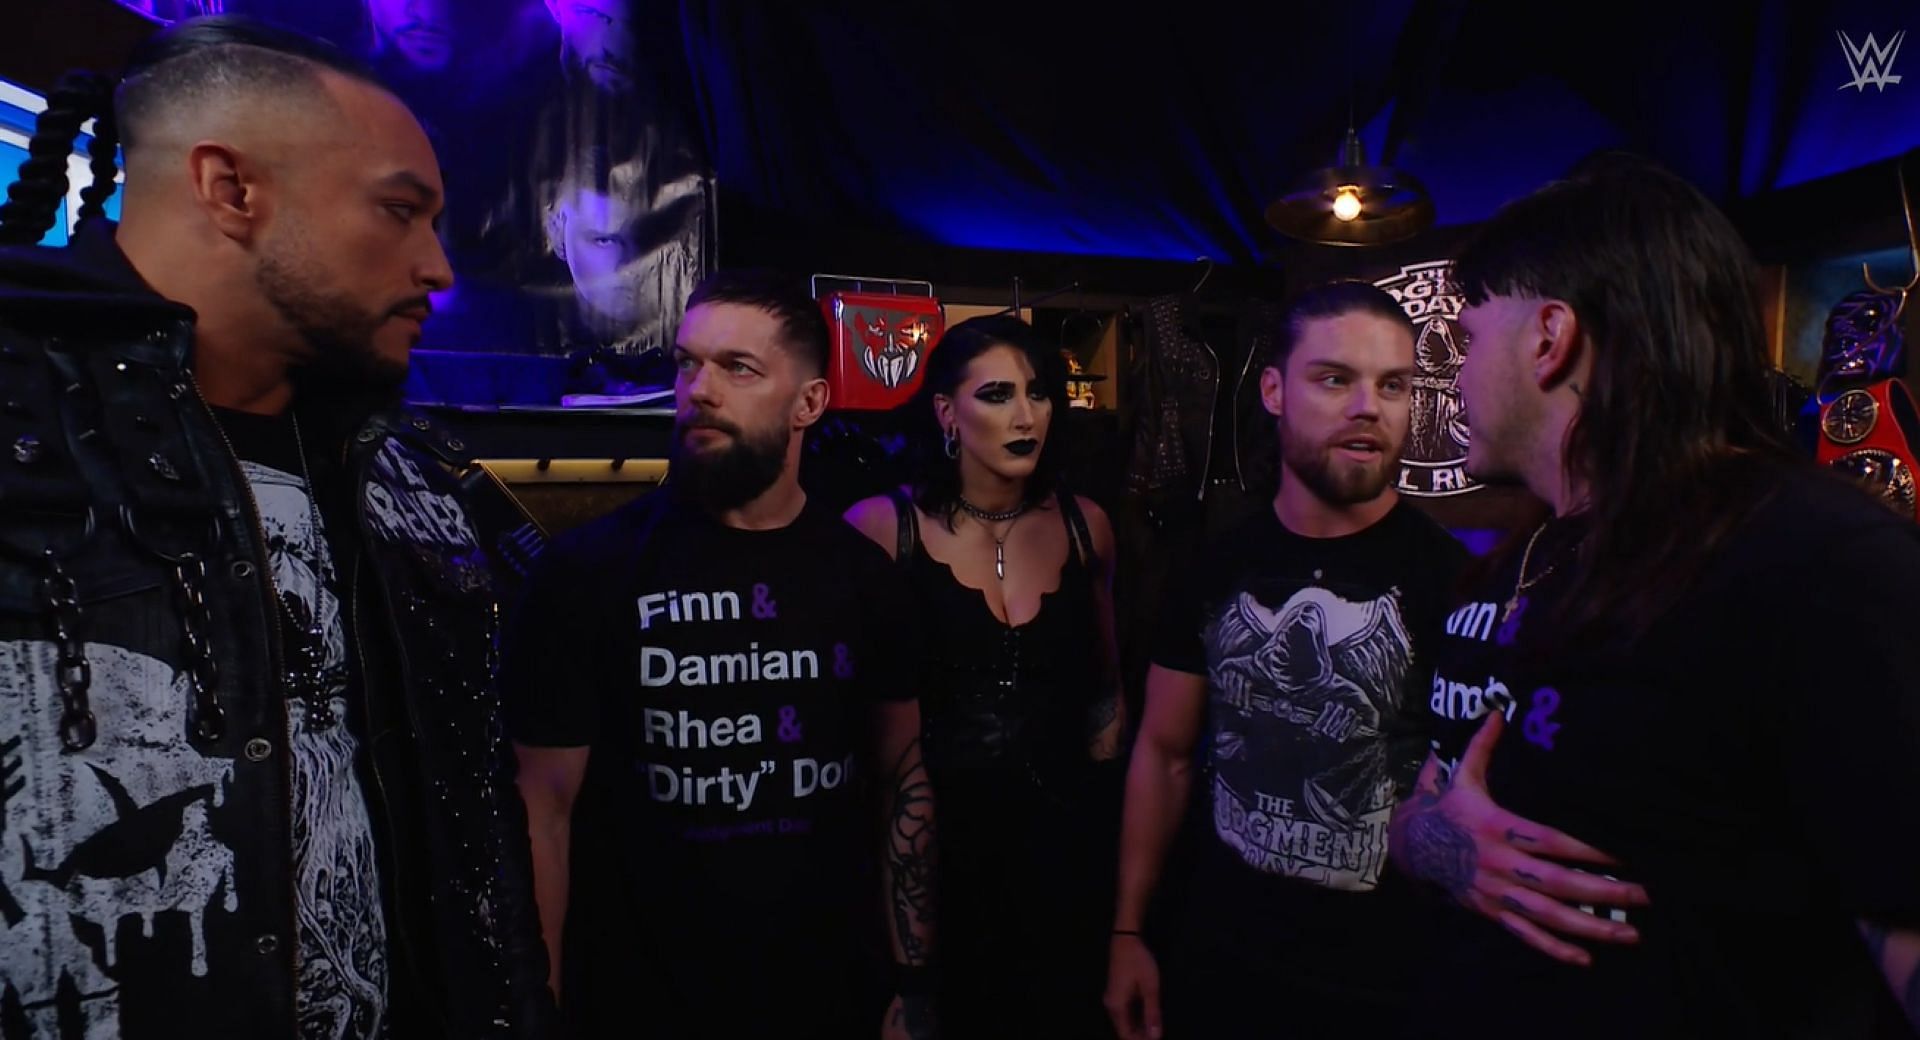 Will The Judgment Day be able to stay together during the WWE Draft?